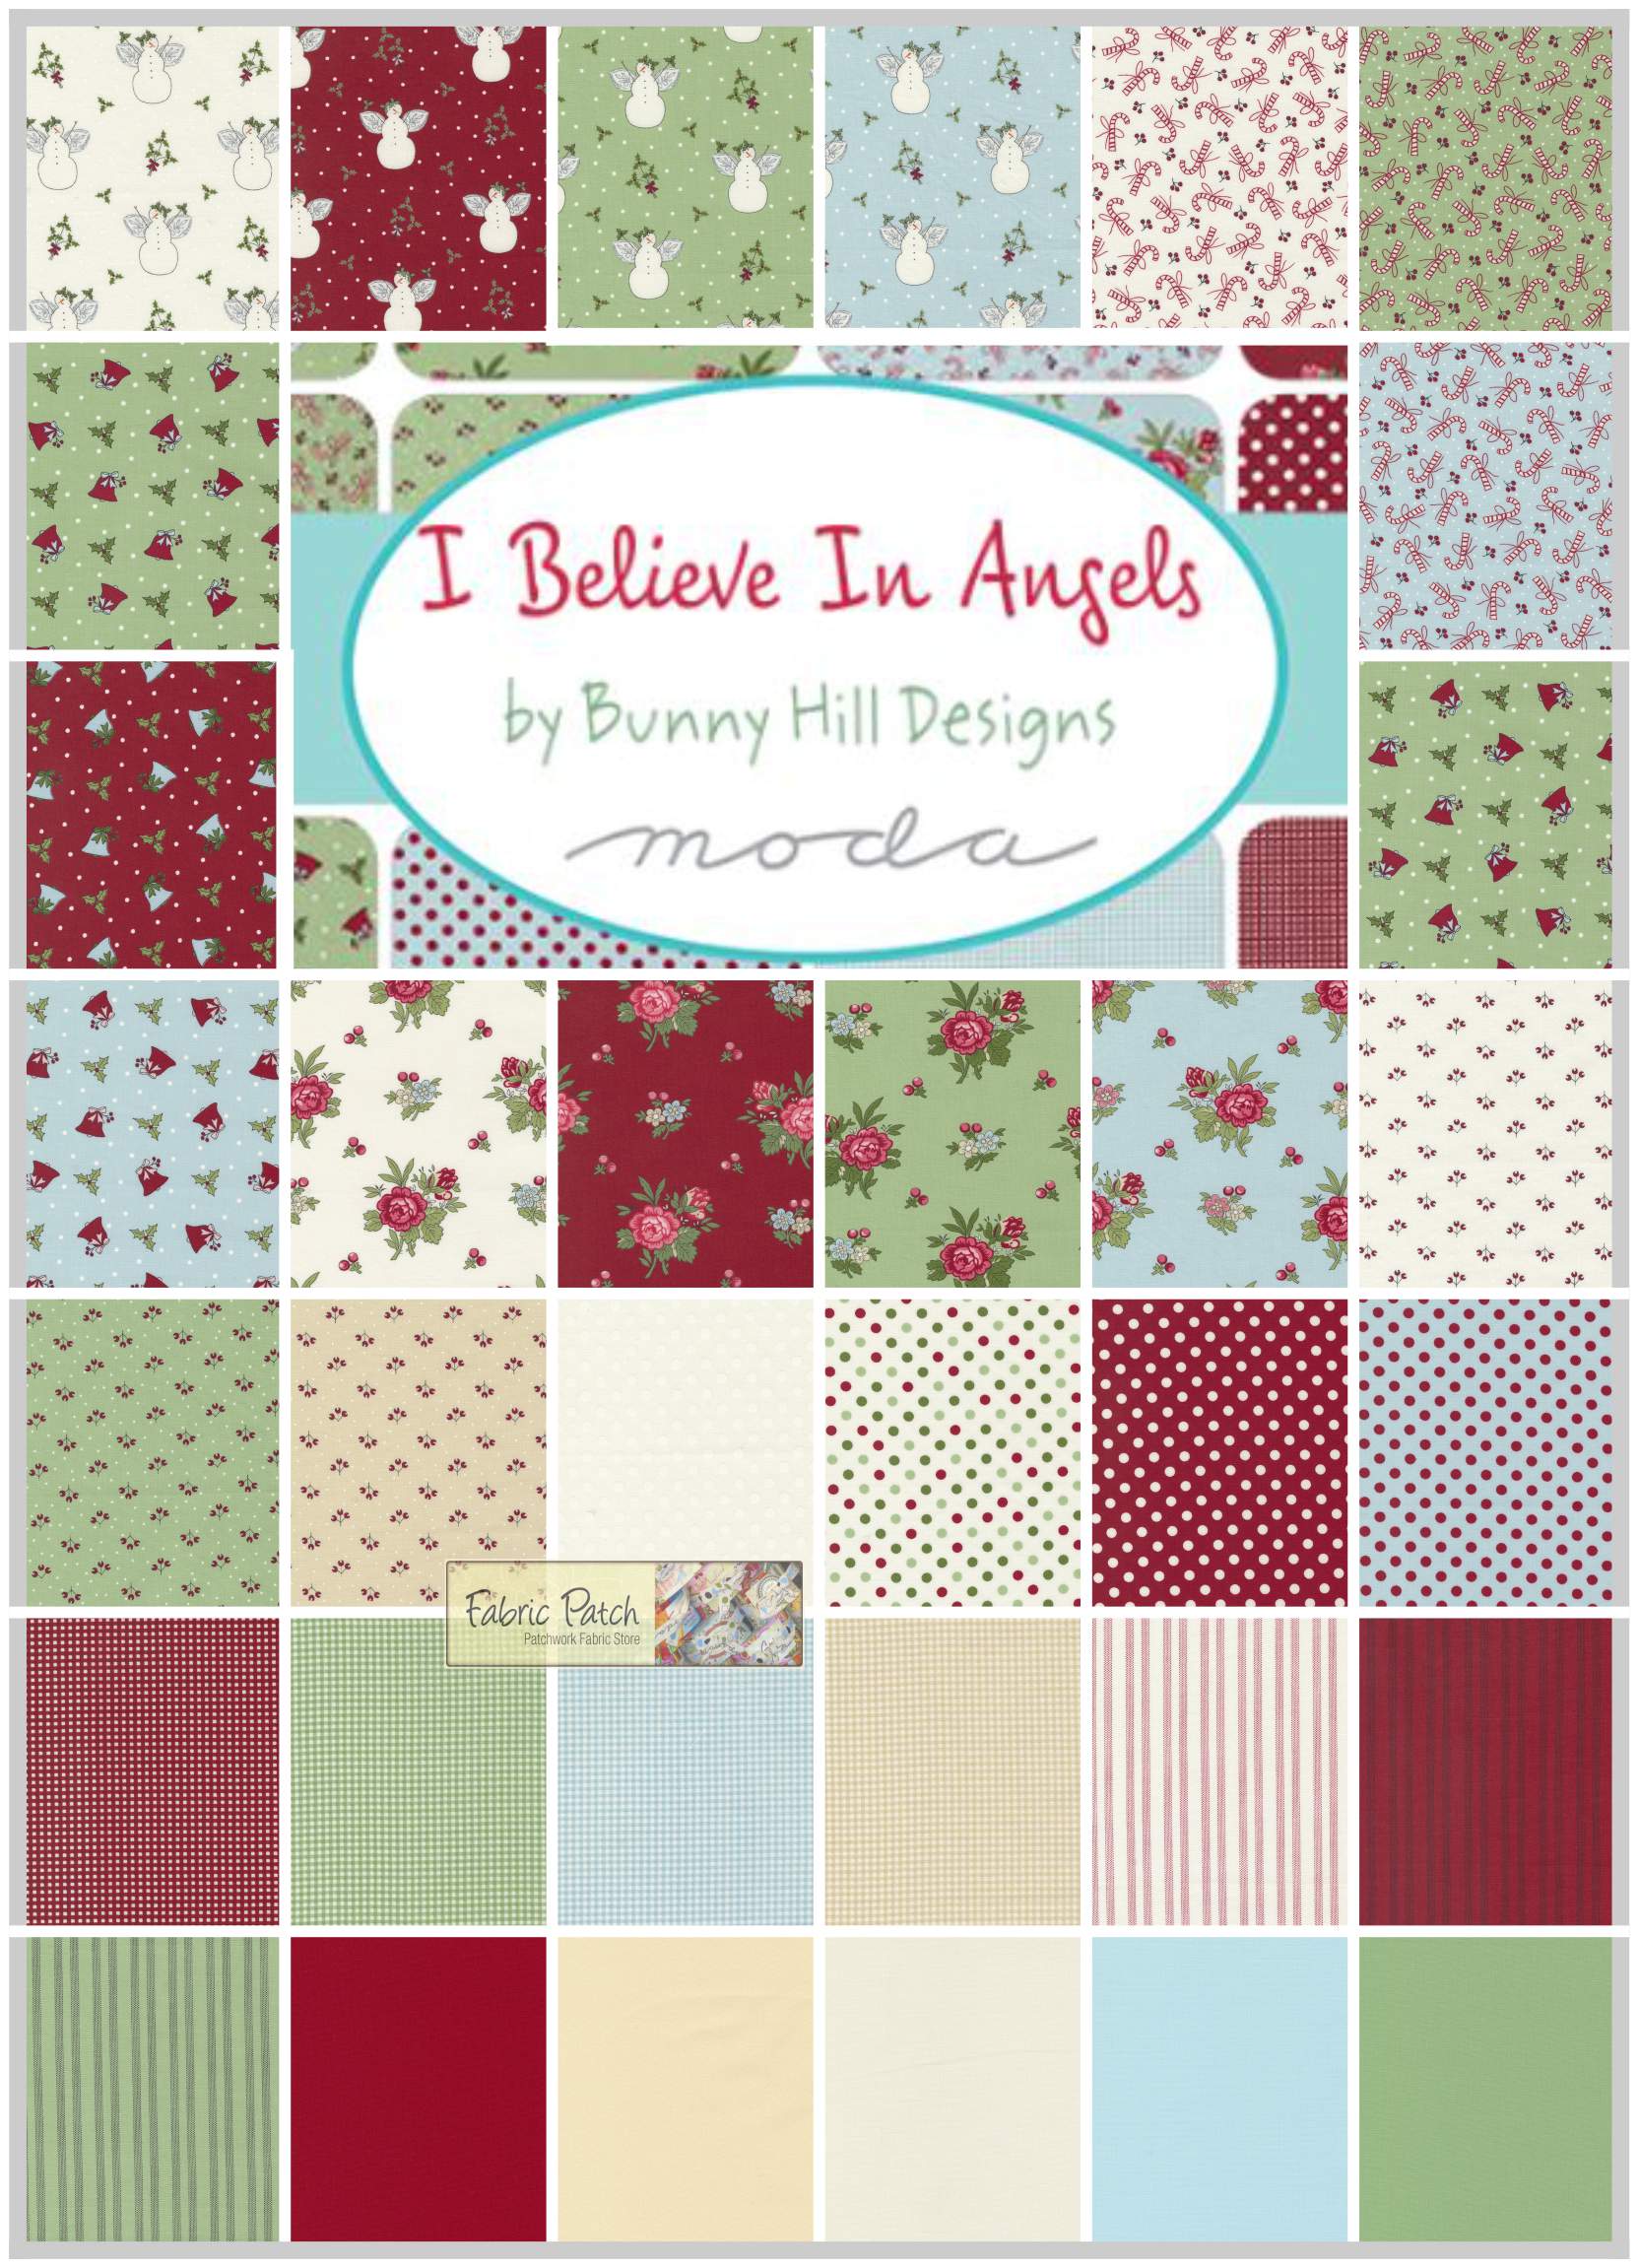 I Believe in Angels Fat Quarter Bundle Applique, patchwork and quilting fabric. Range by Bunny Hill for Moda Fabrics.